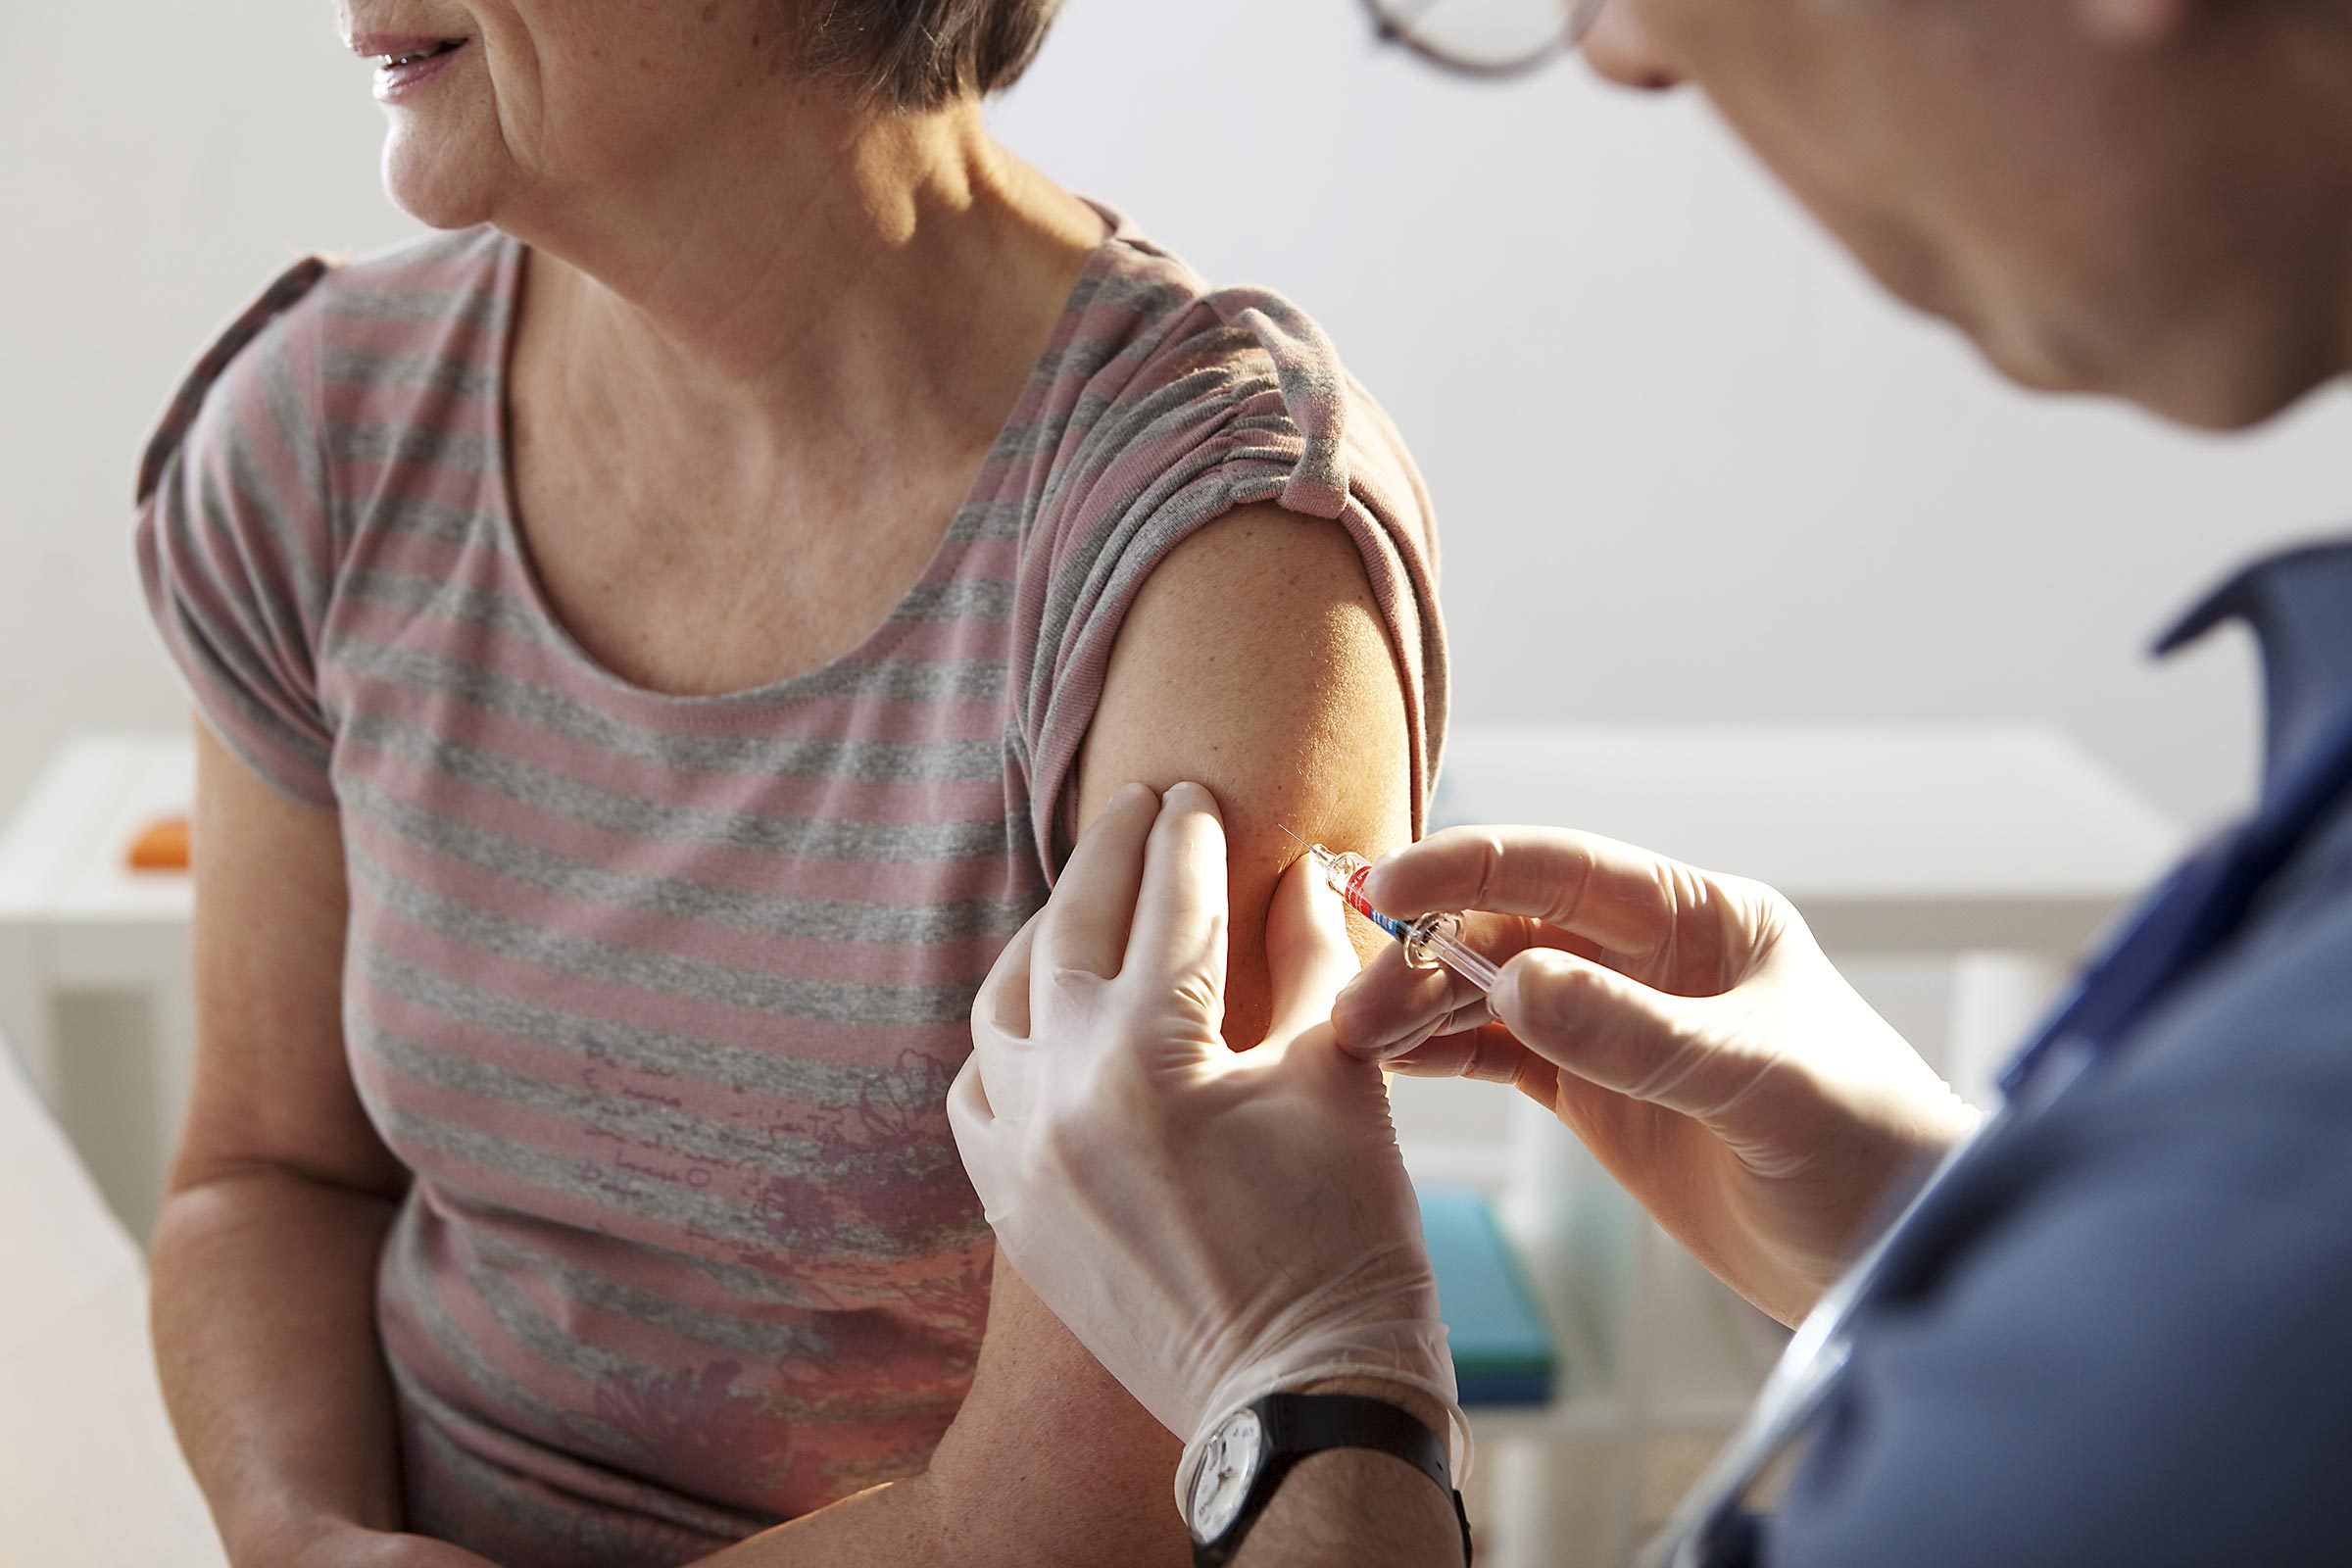 There's More Than One Flu Shot: Which Should You Get?